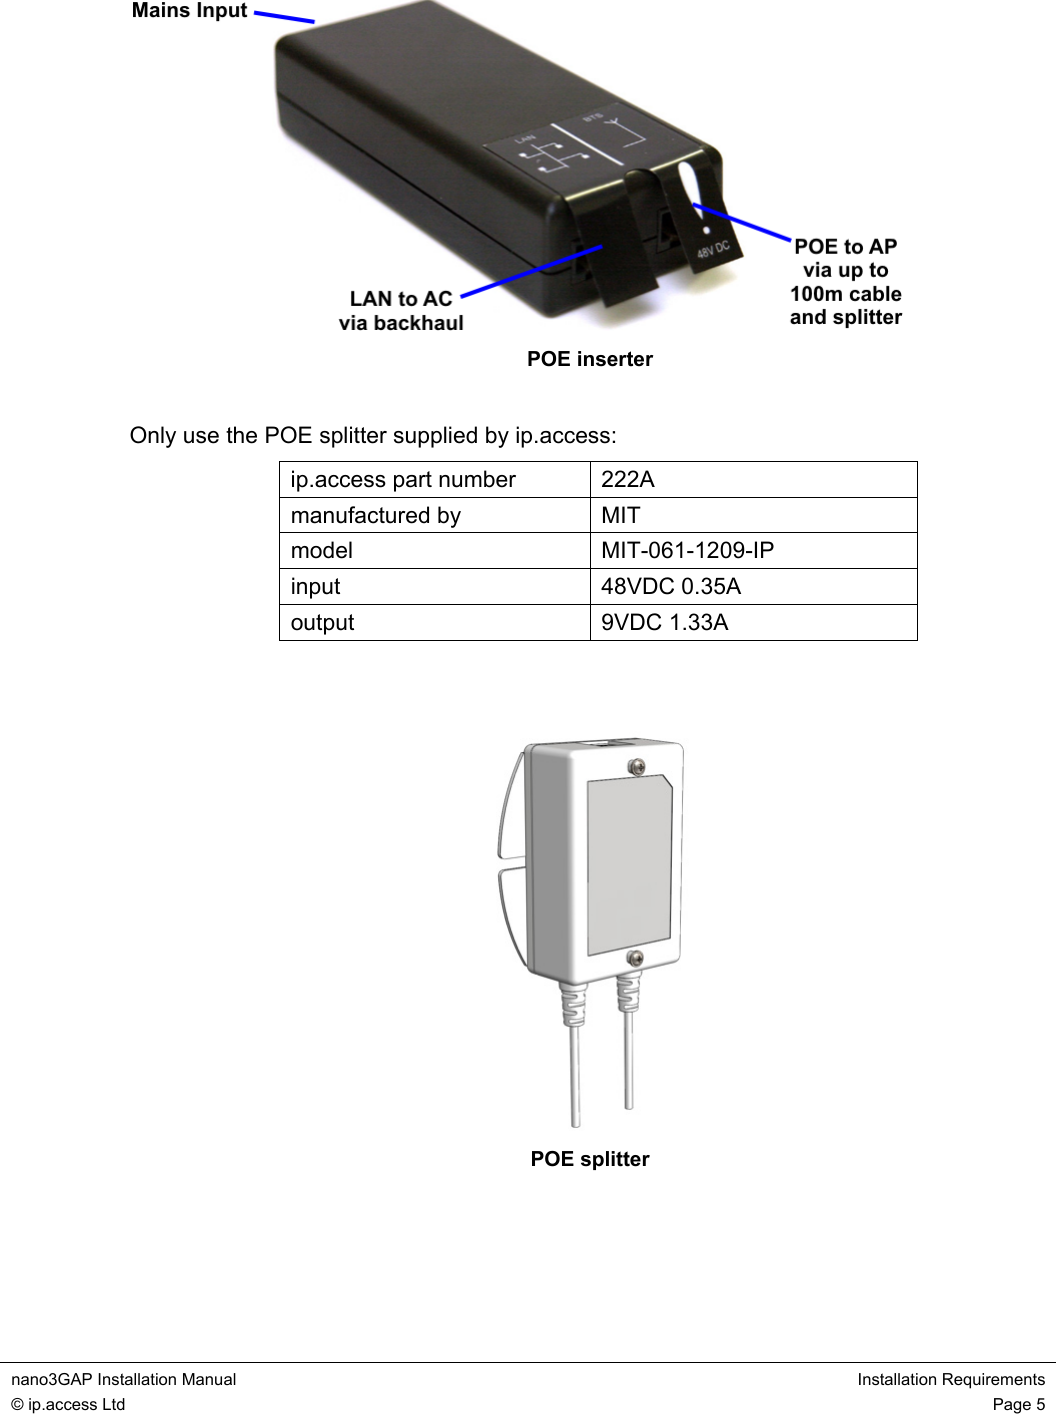  nano3GAP Installation Manual  Installation Requirements © ip.access Ltd  Page 5   POE inserter  Only use the POE splitter supplied by ip.access: ip.access part number  222A manufactured by  MIT model MIT-061-1209-IP input 48VDC 0.35A output 9VDC 1.33A    POE splitter   